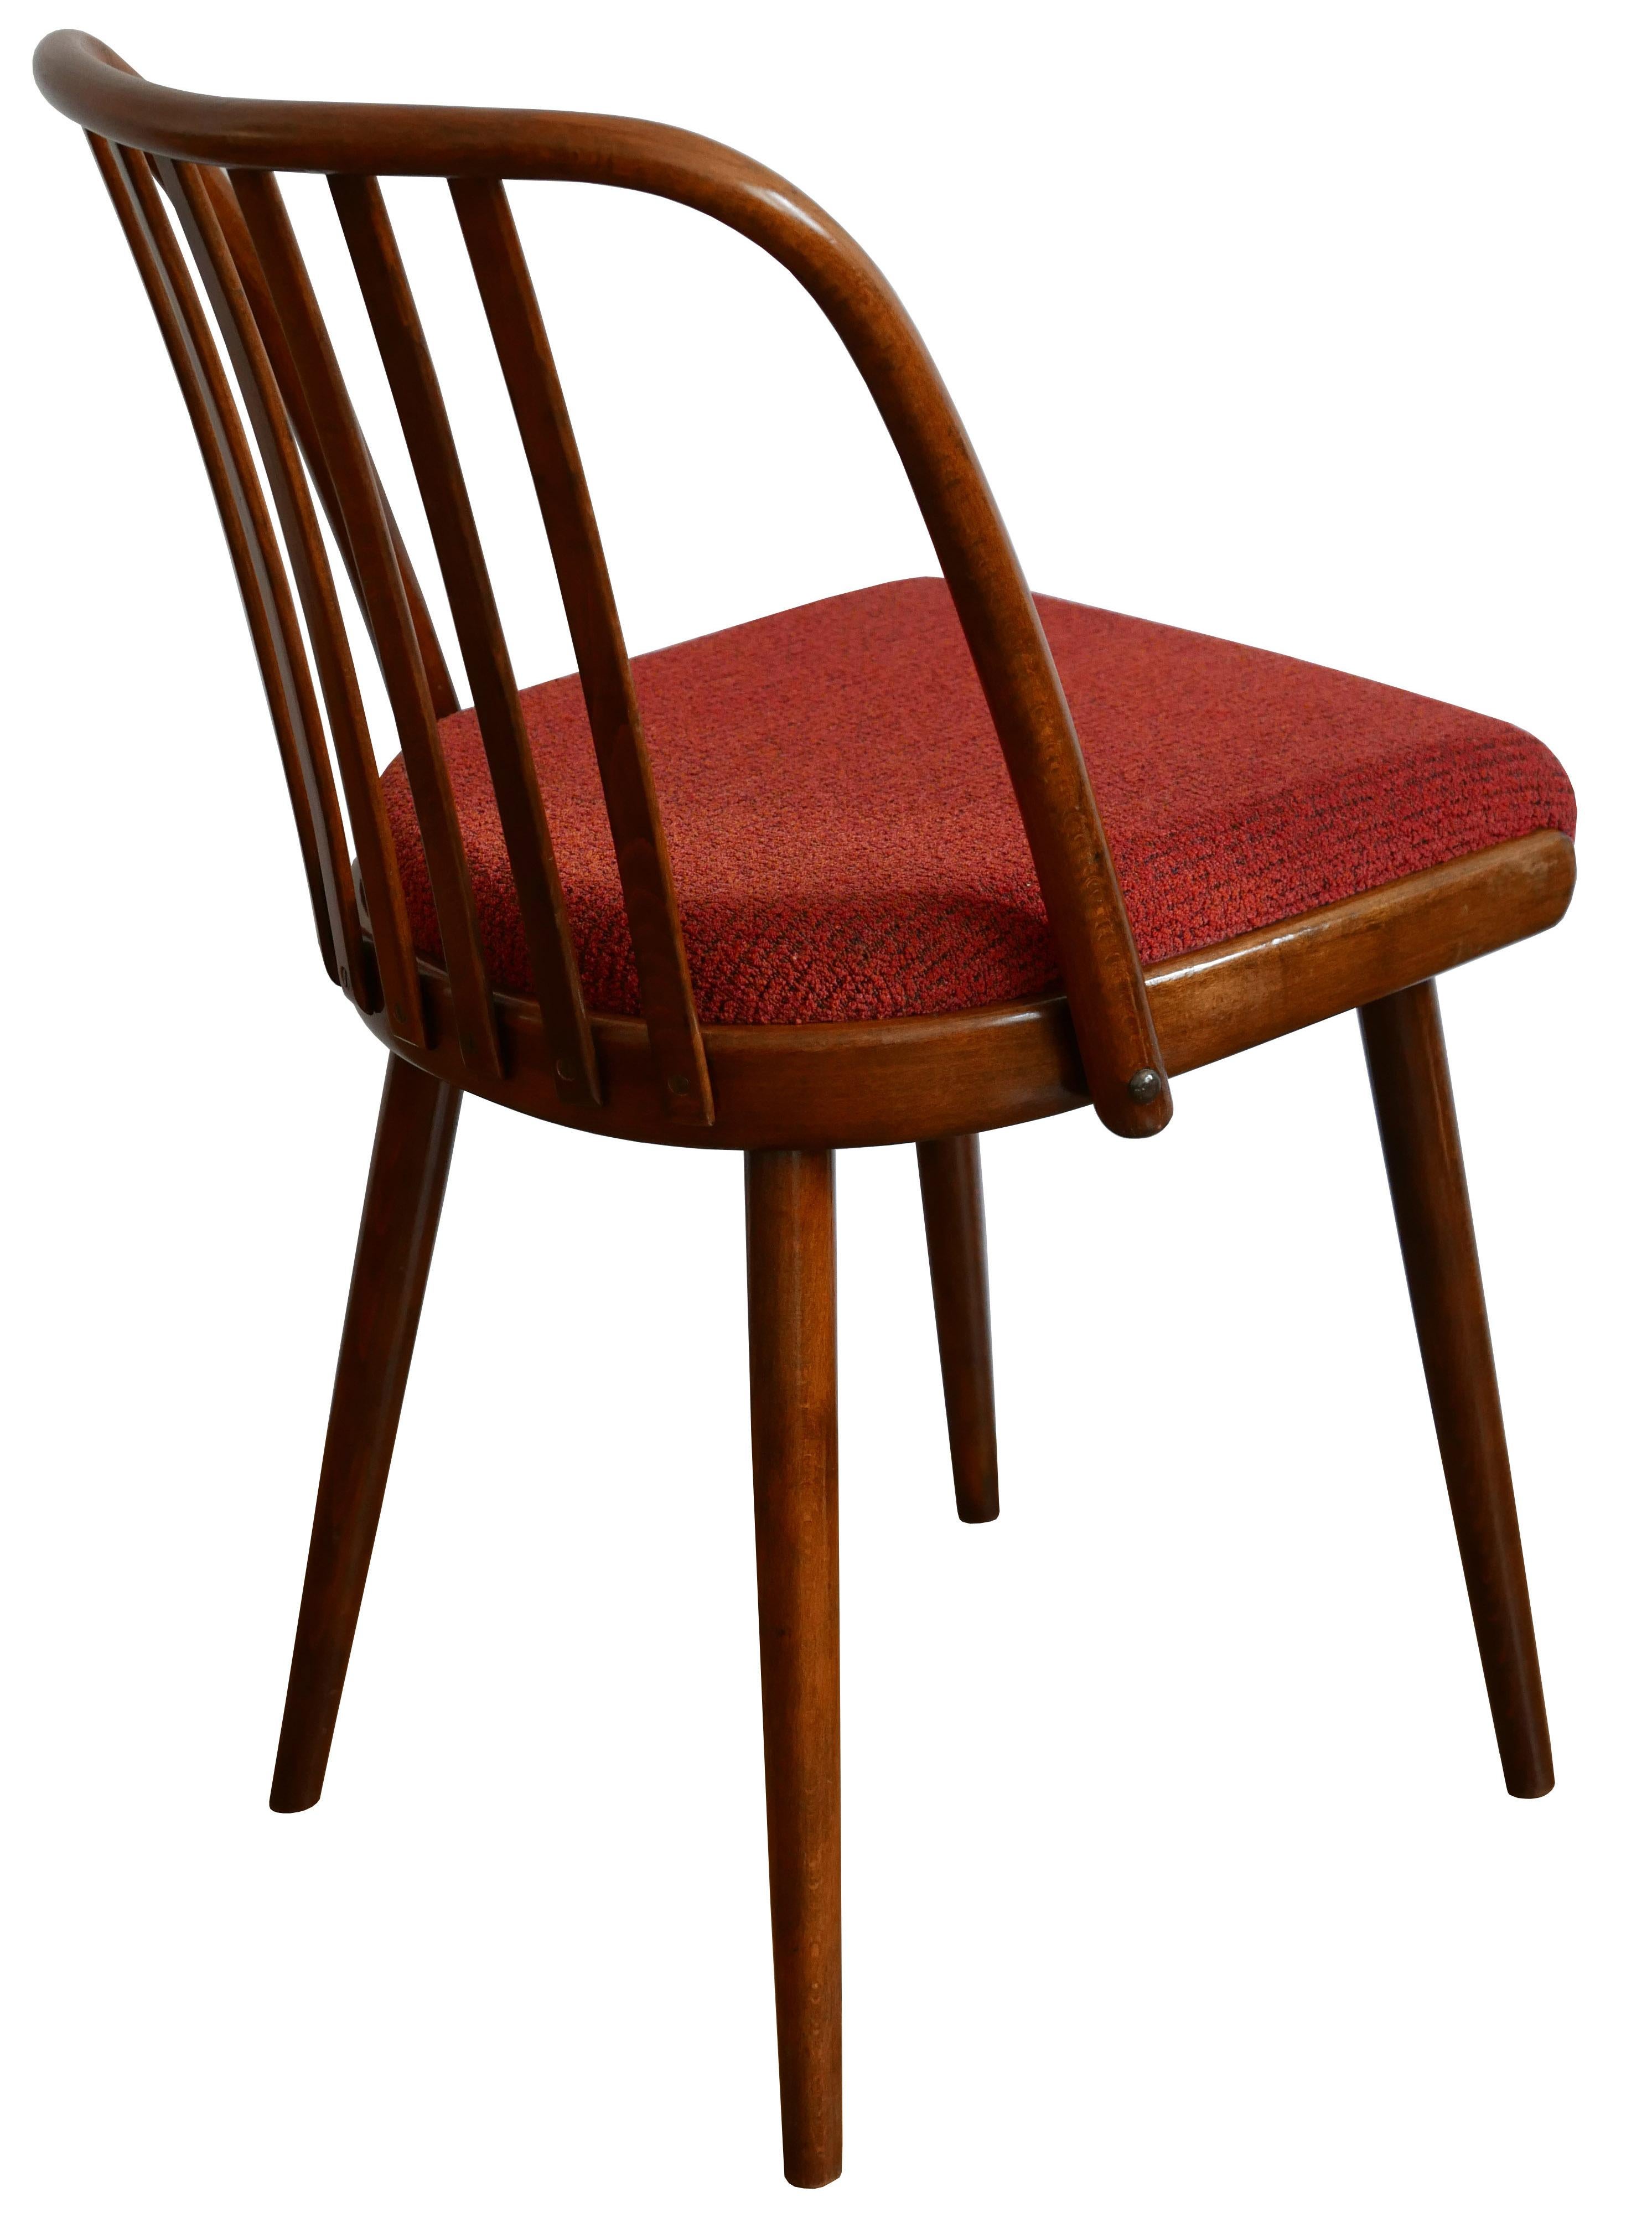 Very Rare Set of Six Dining Chairs by Antonin Suman for Jinota Sobeslav In Excellent Condition For Sale In Brno, CZ